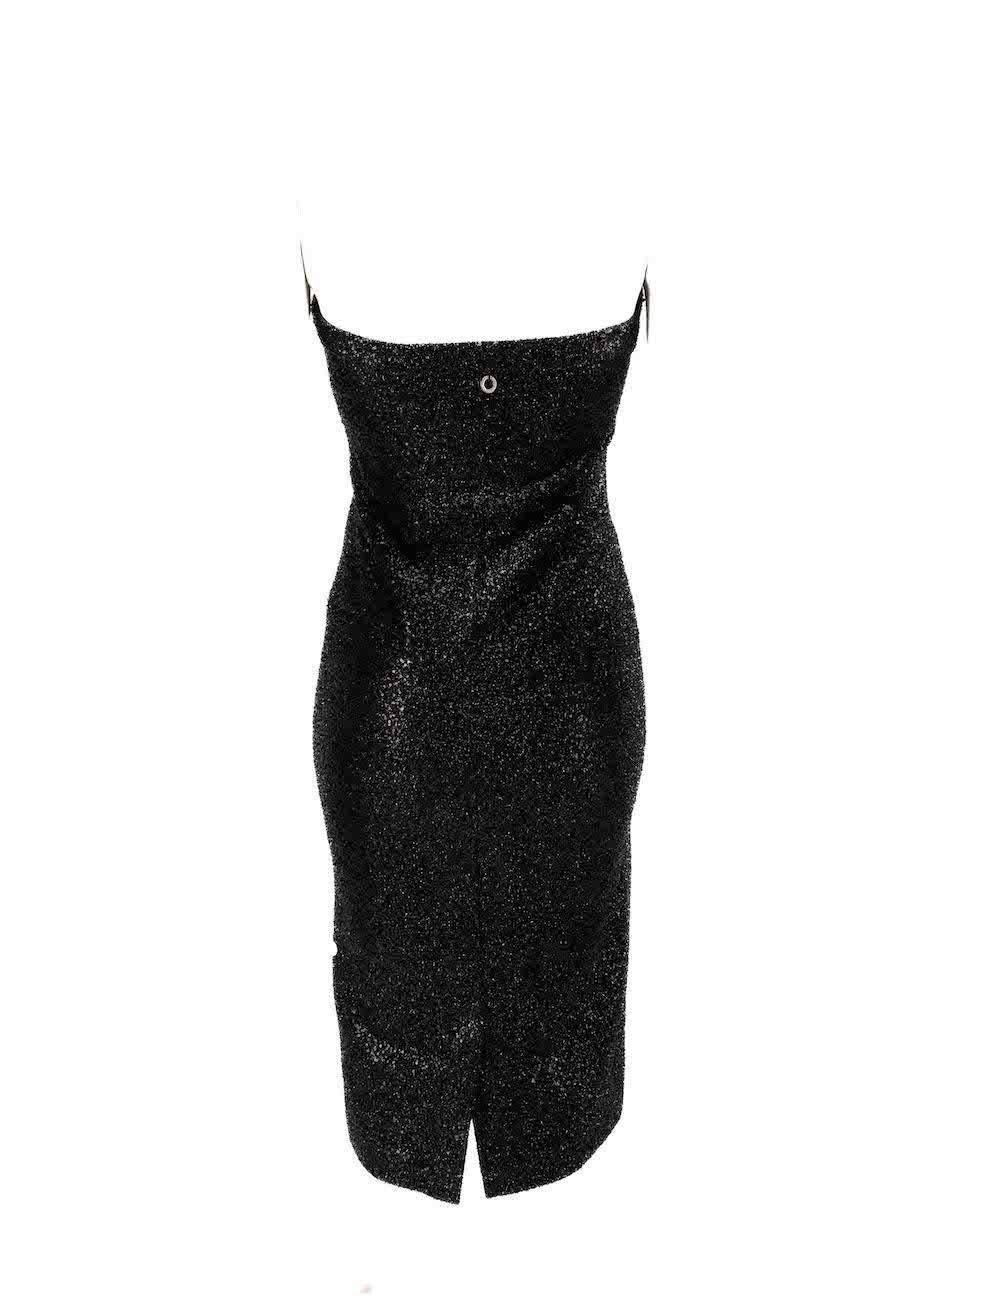 Hanne Bloch Black Sequinned Strapless Dress Size S In New Condition For Sale In London, GB